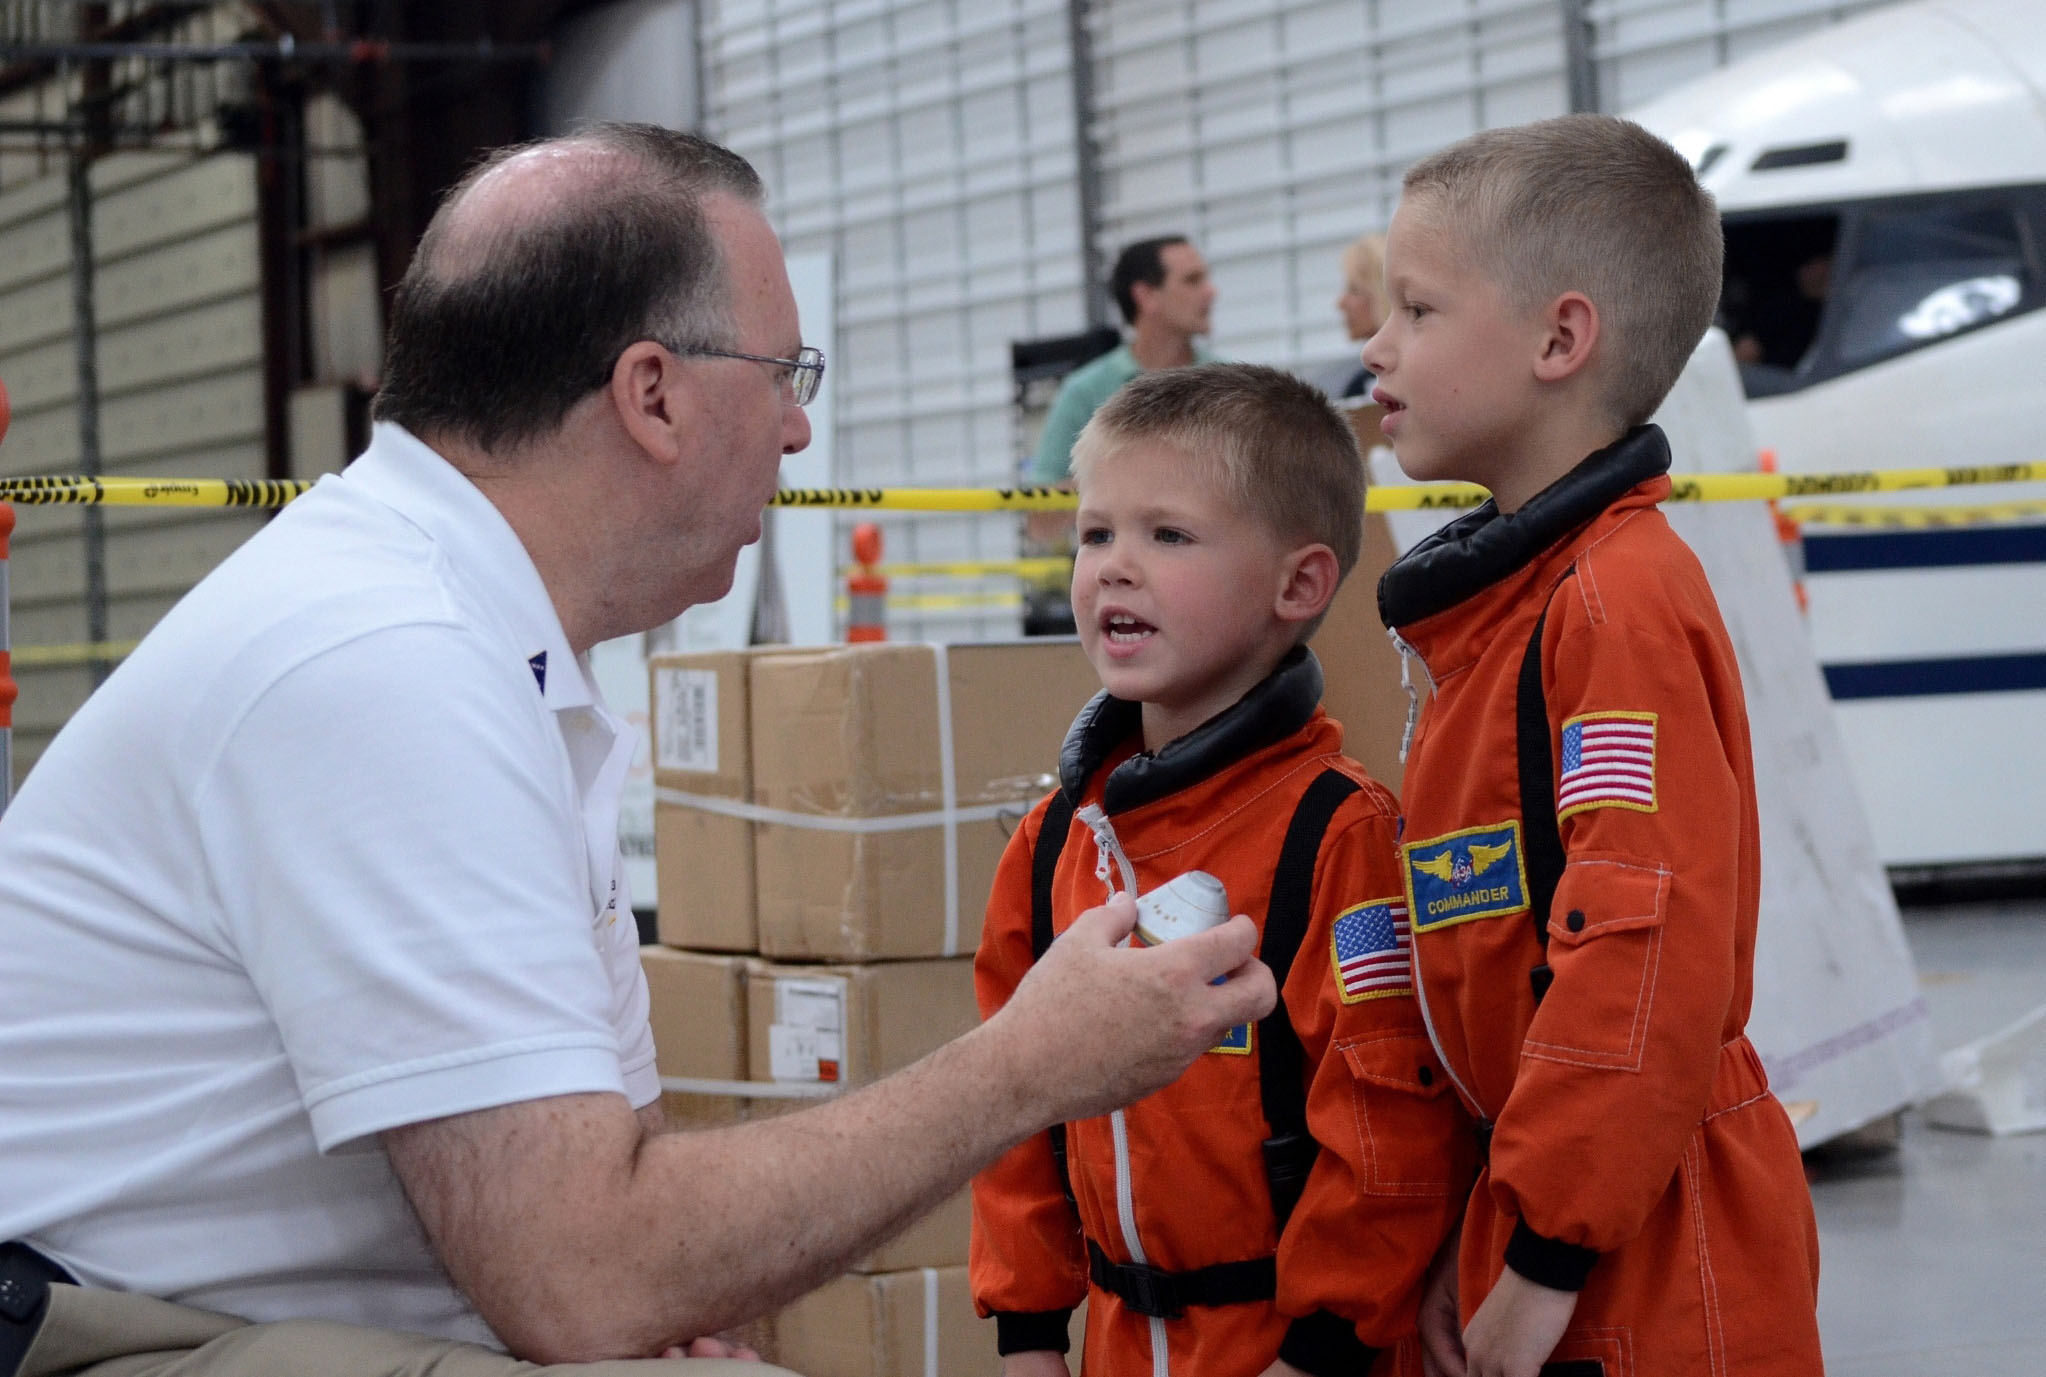  Brothers and future astornauts Galeb (4 years old) and Aiden (7 years old) Mann discuss Orion’s journey with a Lockheed Martin team member. Photo by John Bezosky Jr.